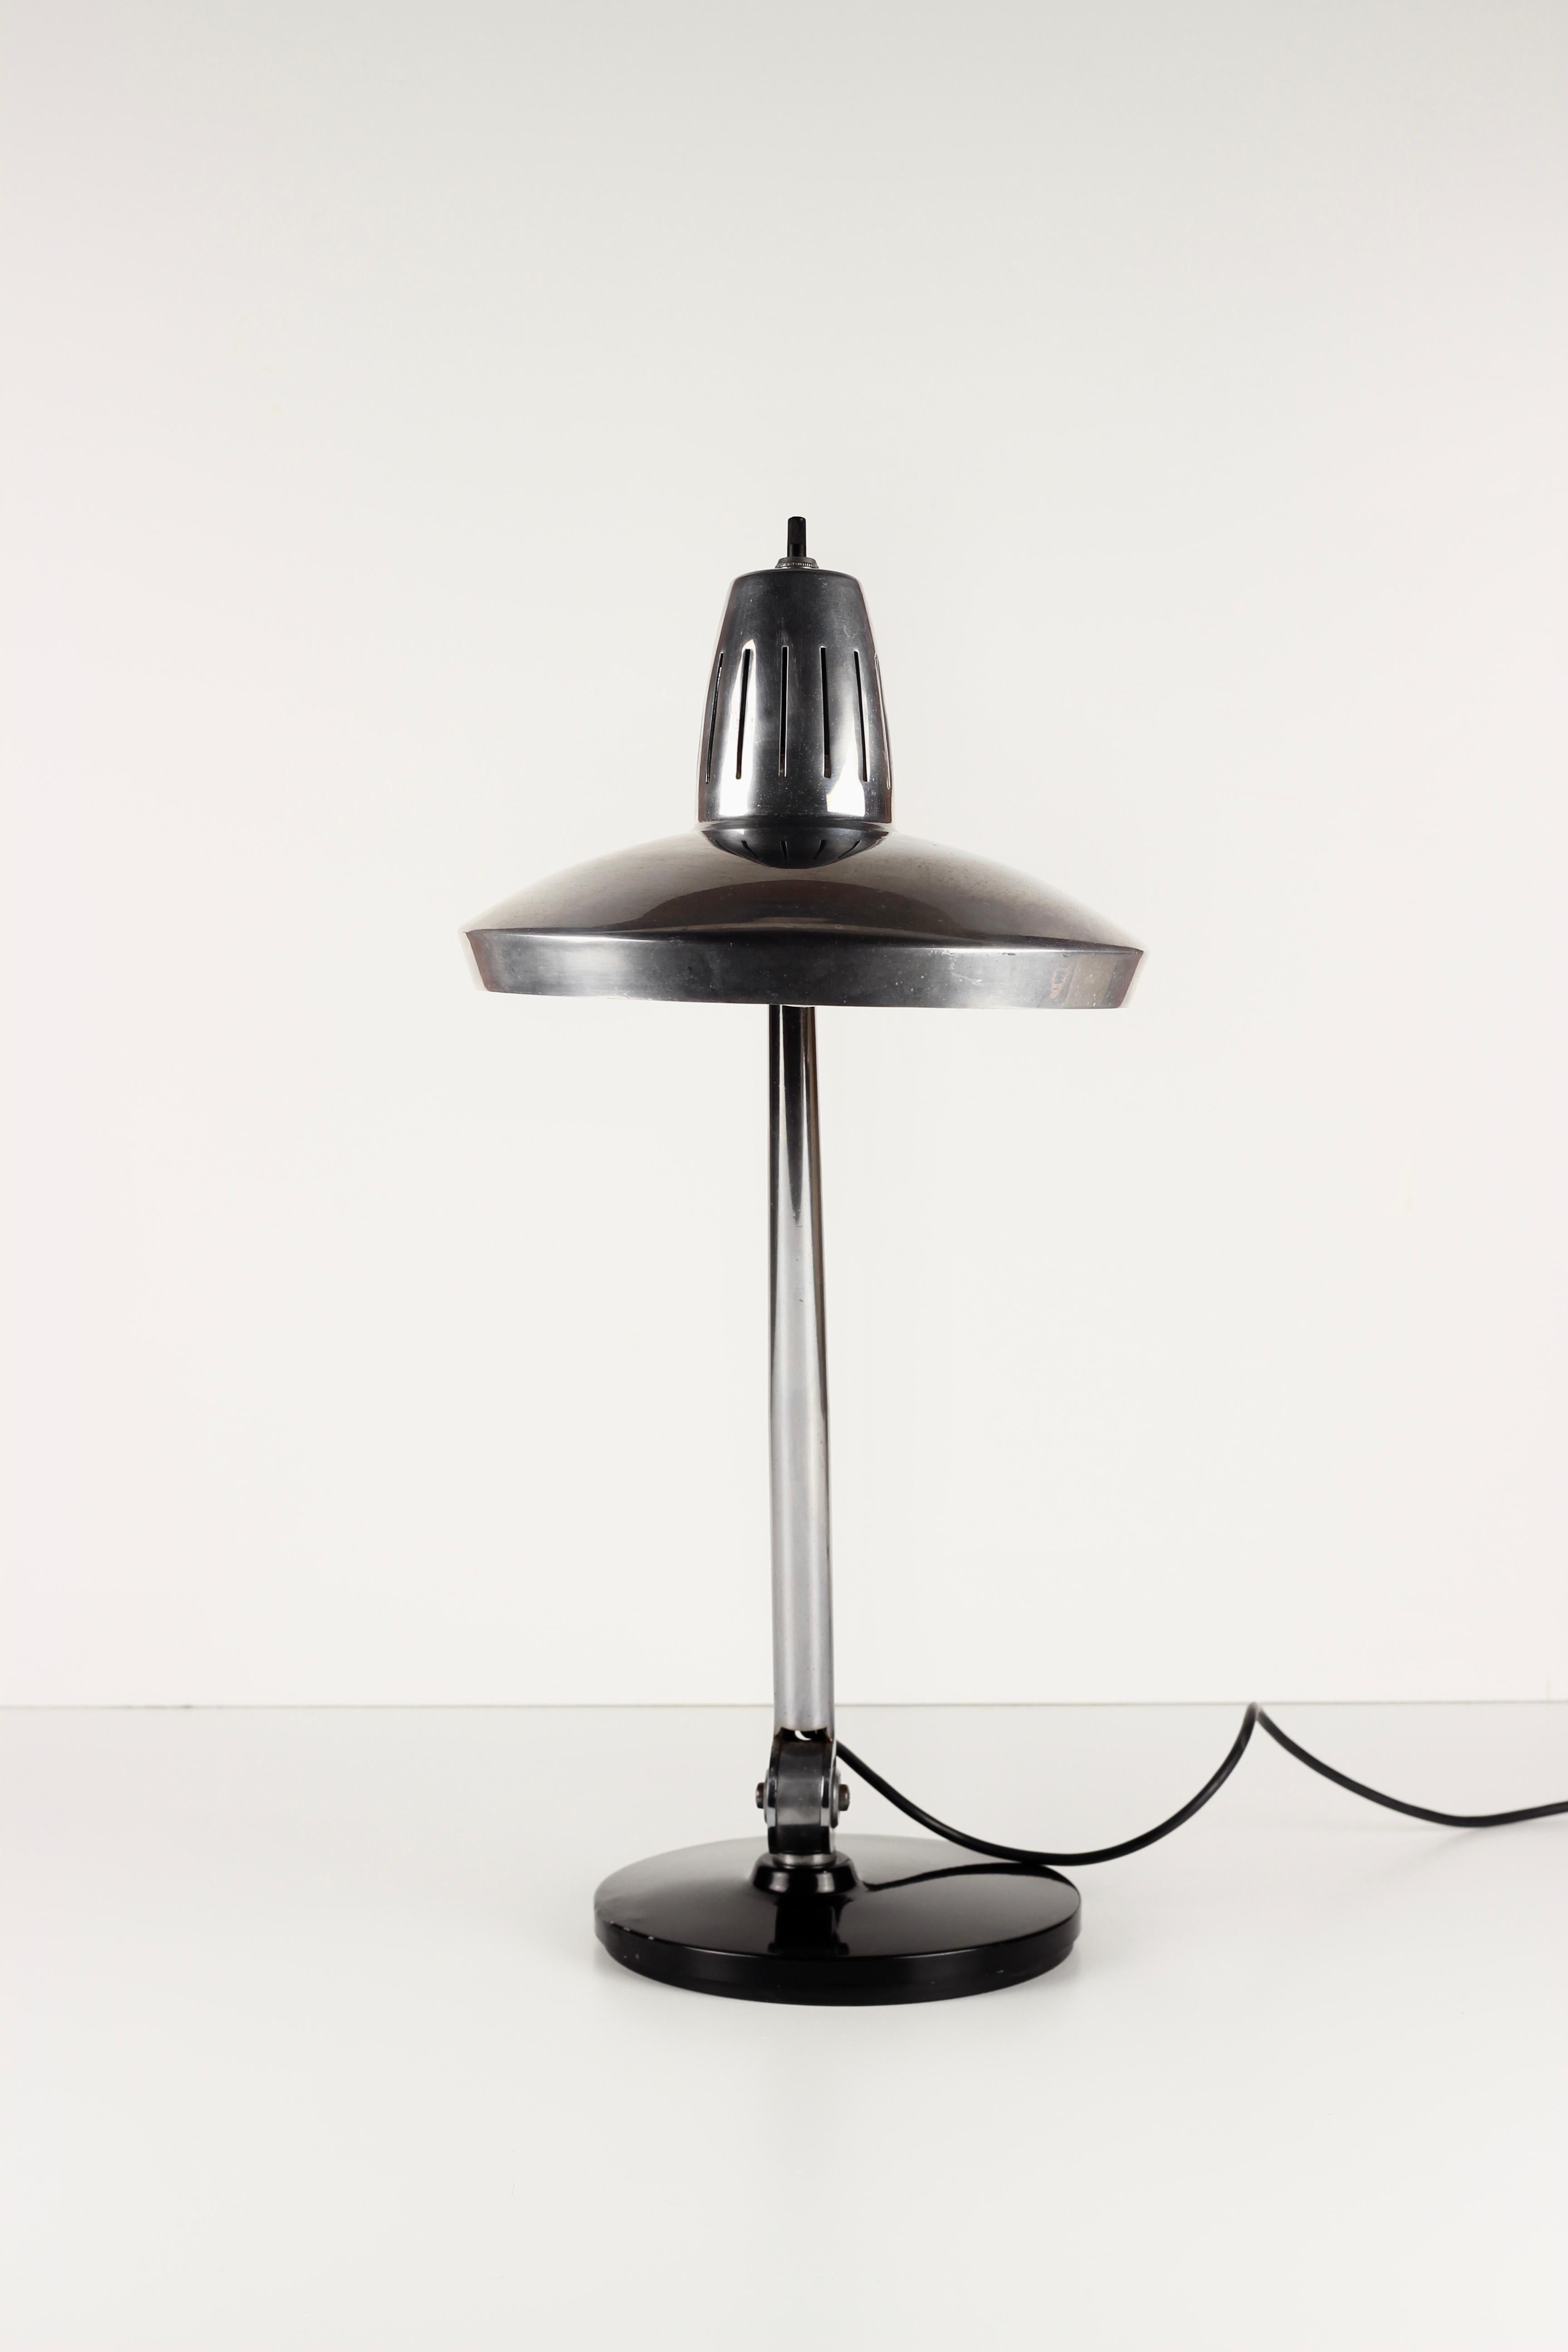 A rarely seen example of a Fase desk lamp Modelos patentados made in Madrid Spain. Influenced in its design aesthetic from the space age of the 1960’s, this light most often than not is seen in coloured finishes including orange, red etc, but rarely